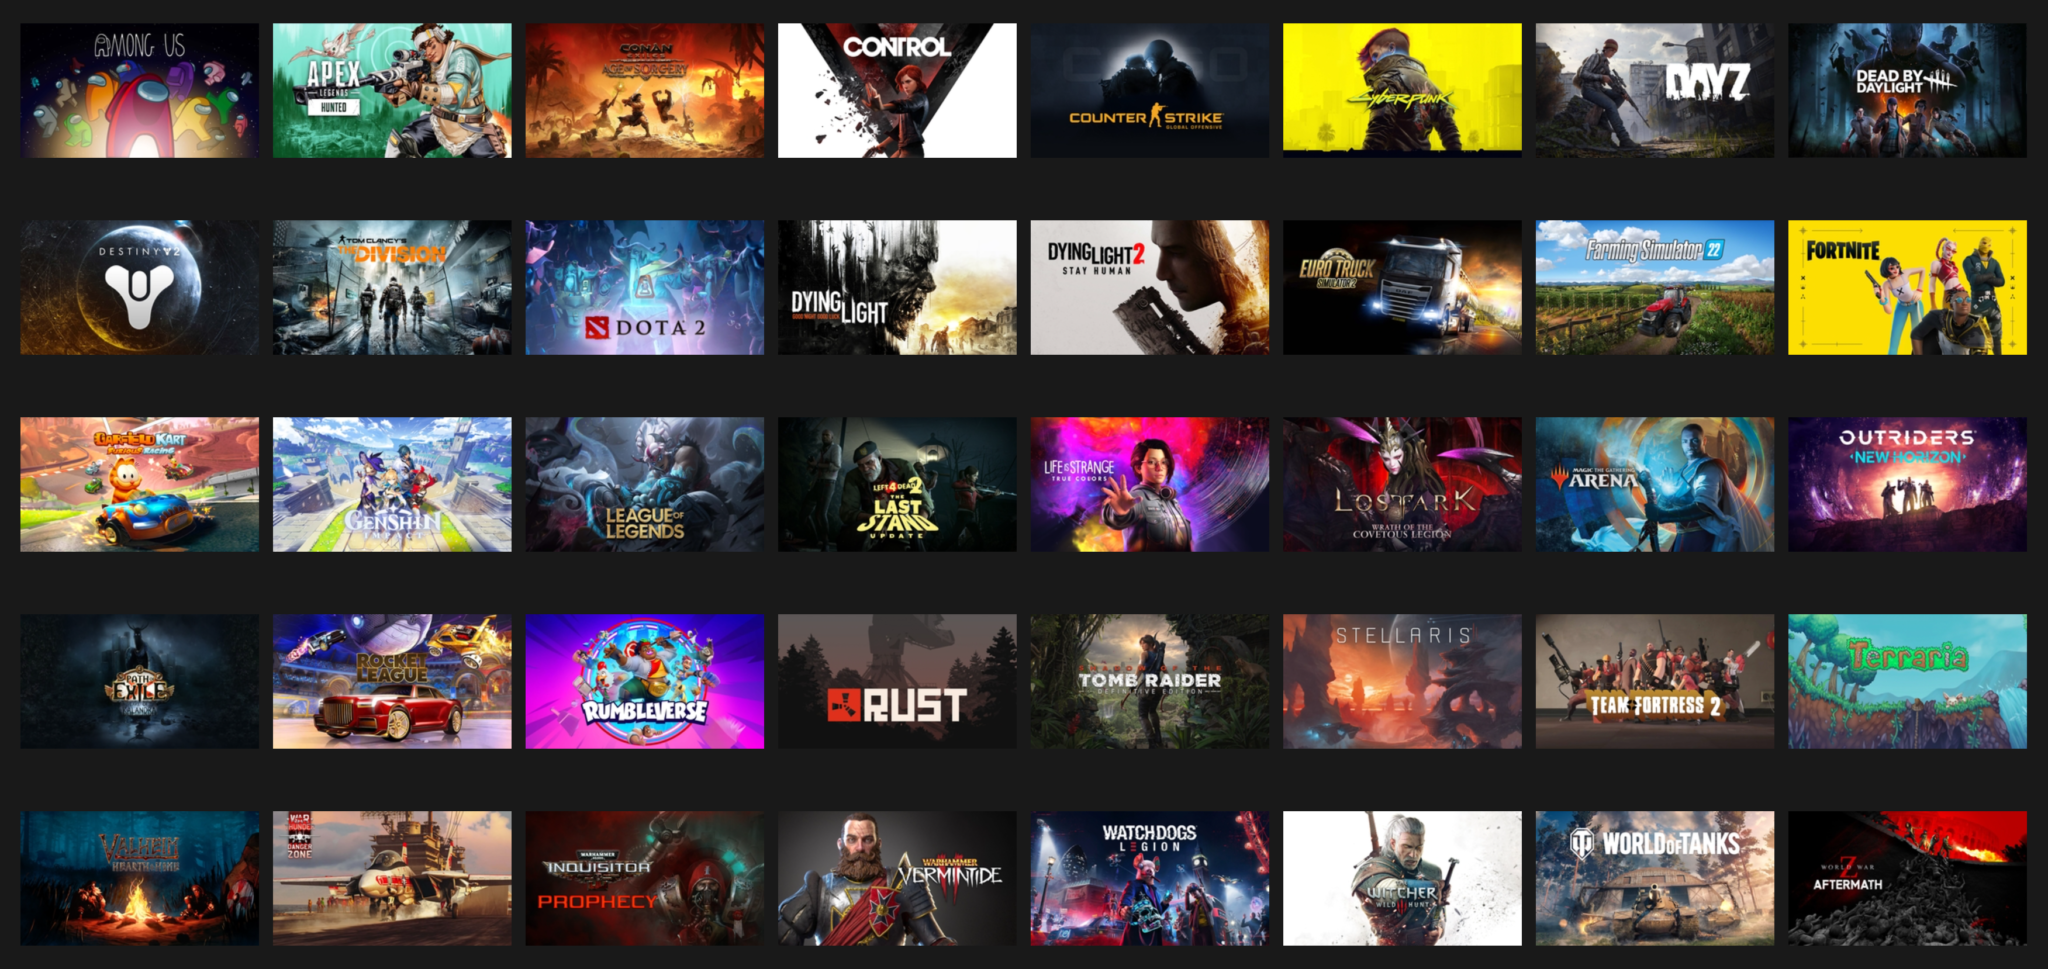 NVIDIA GEFORCE NOW GAMES LIST - ALL GAMES AVAILABLE TO STREAM